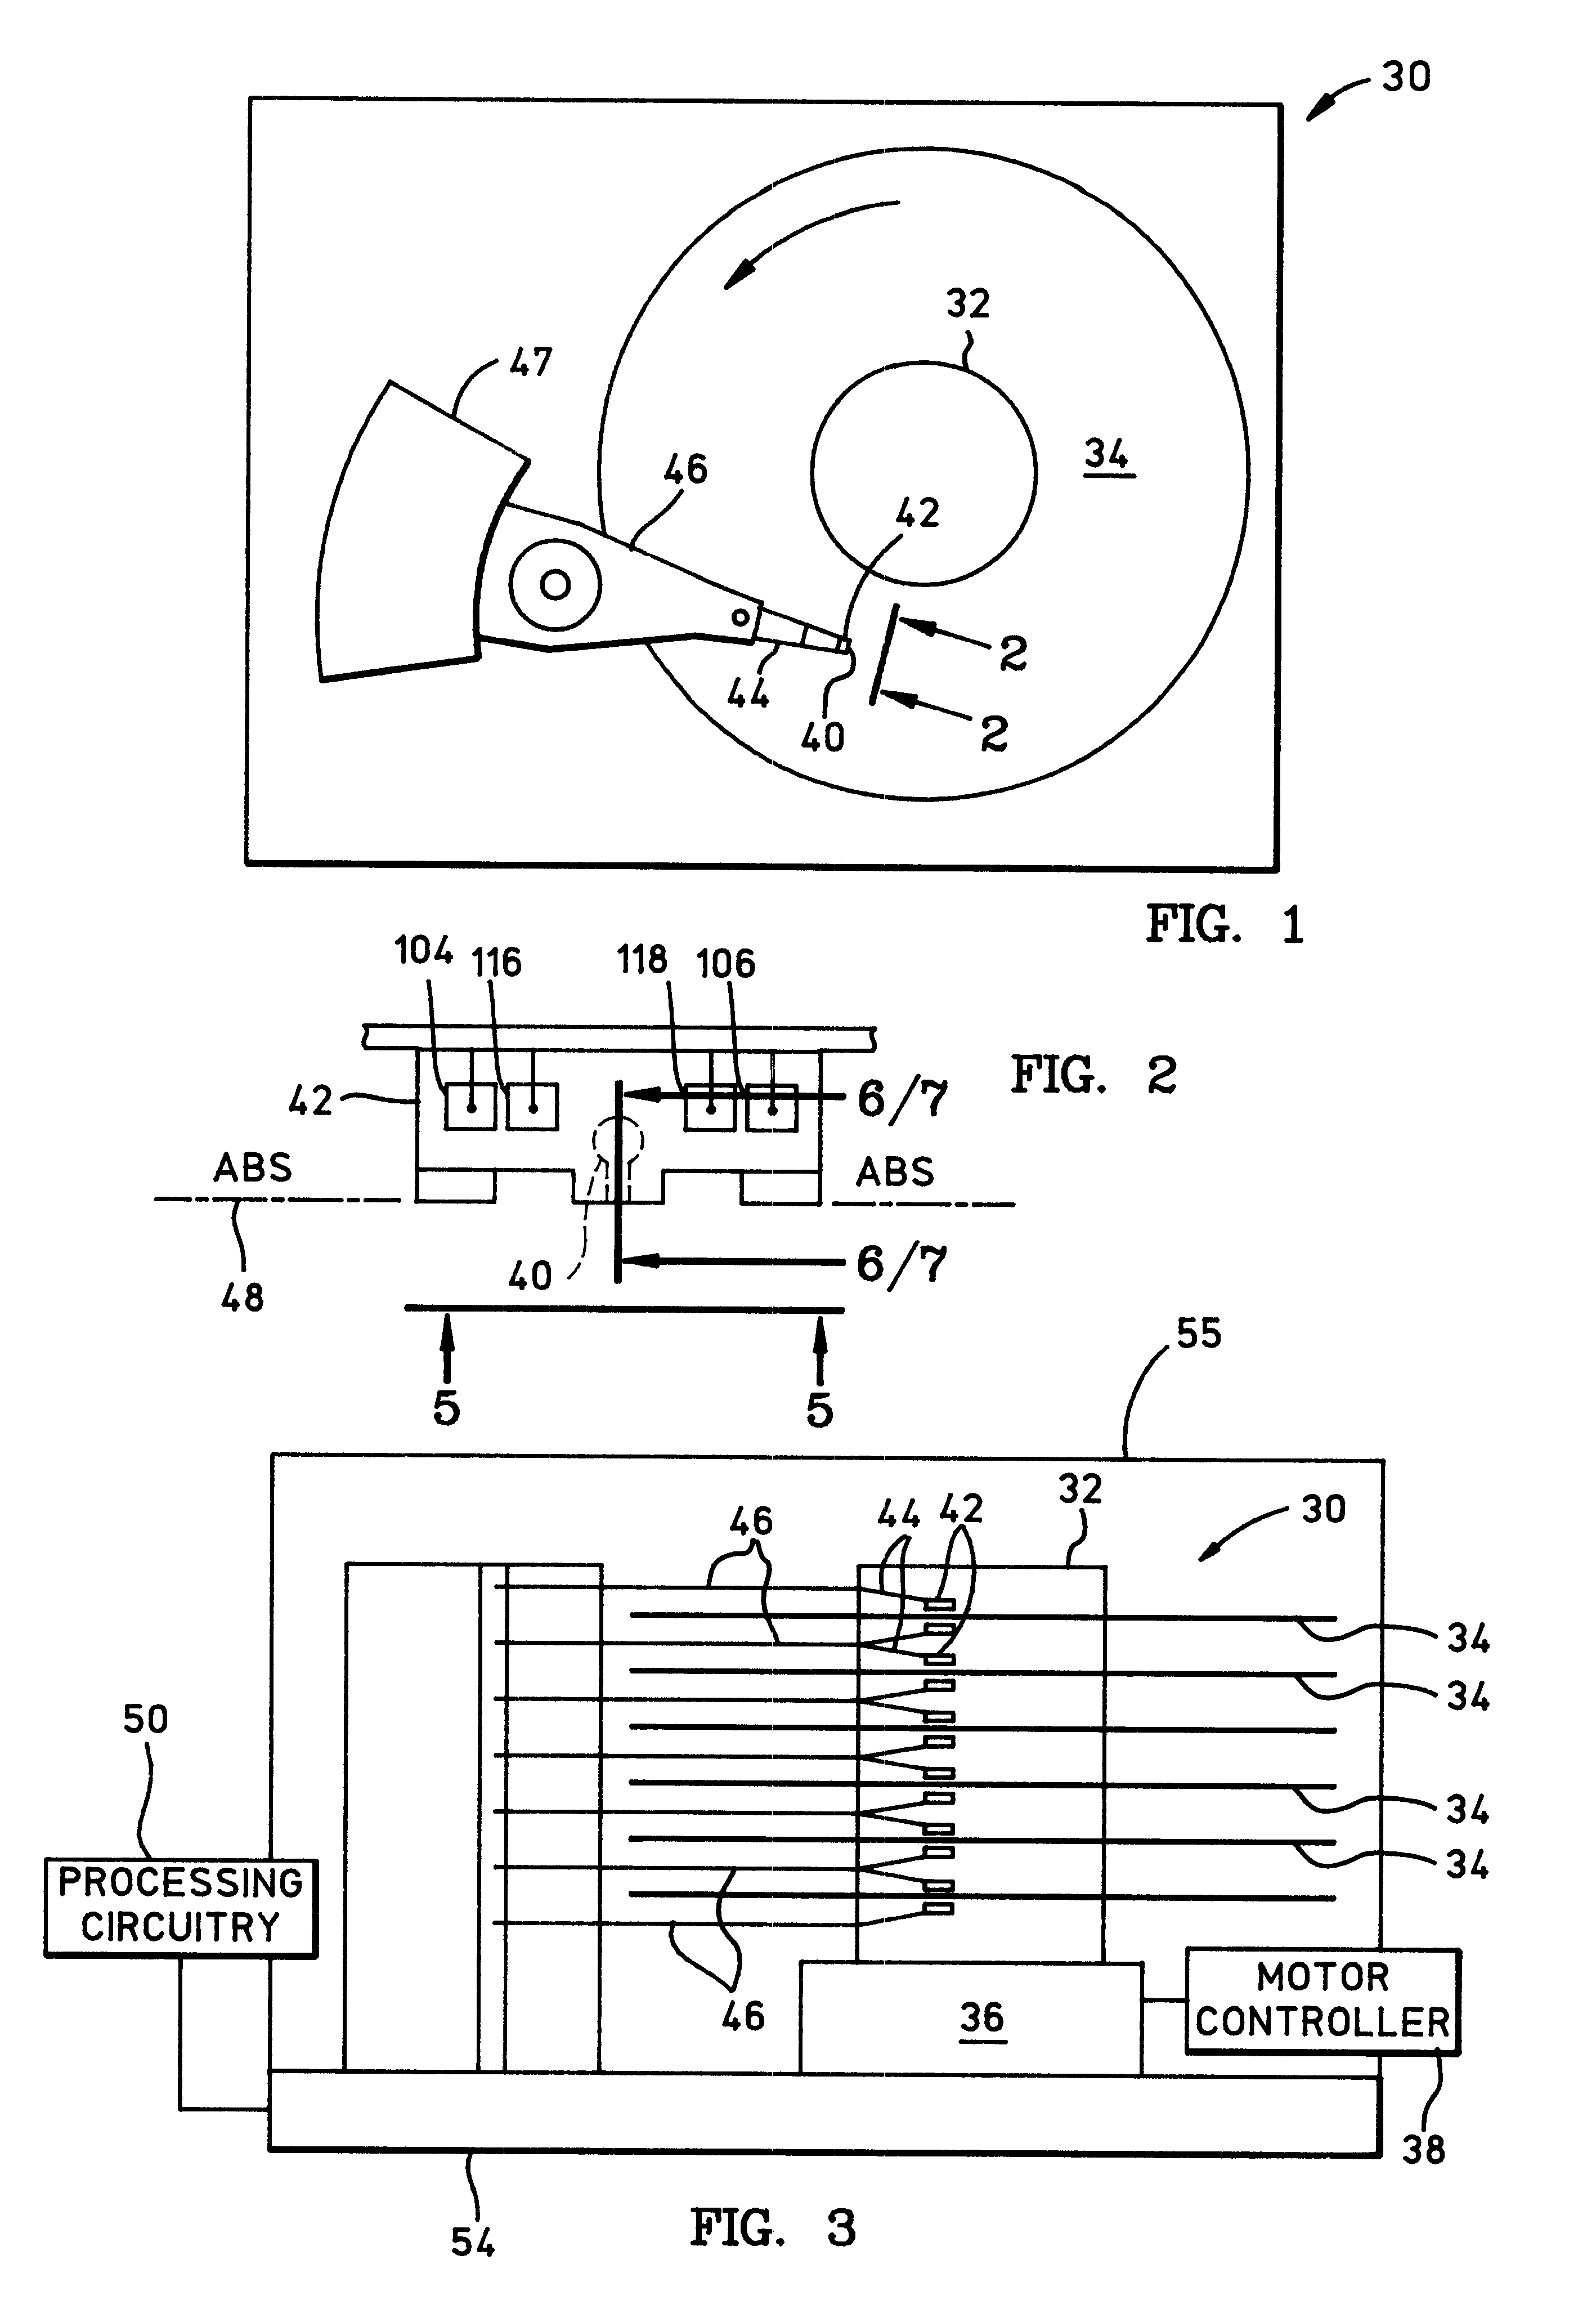 Spin valve sensor with composite pinned layer structure for improving biasing of free layer structure with reduced sense current shunting